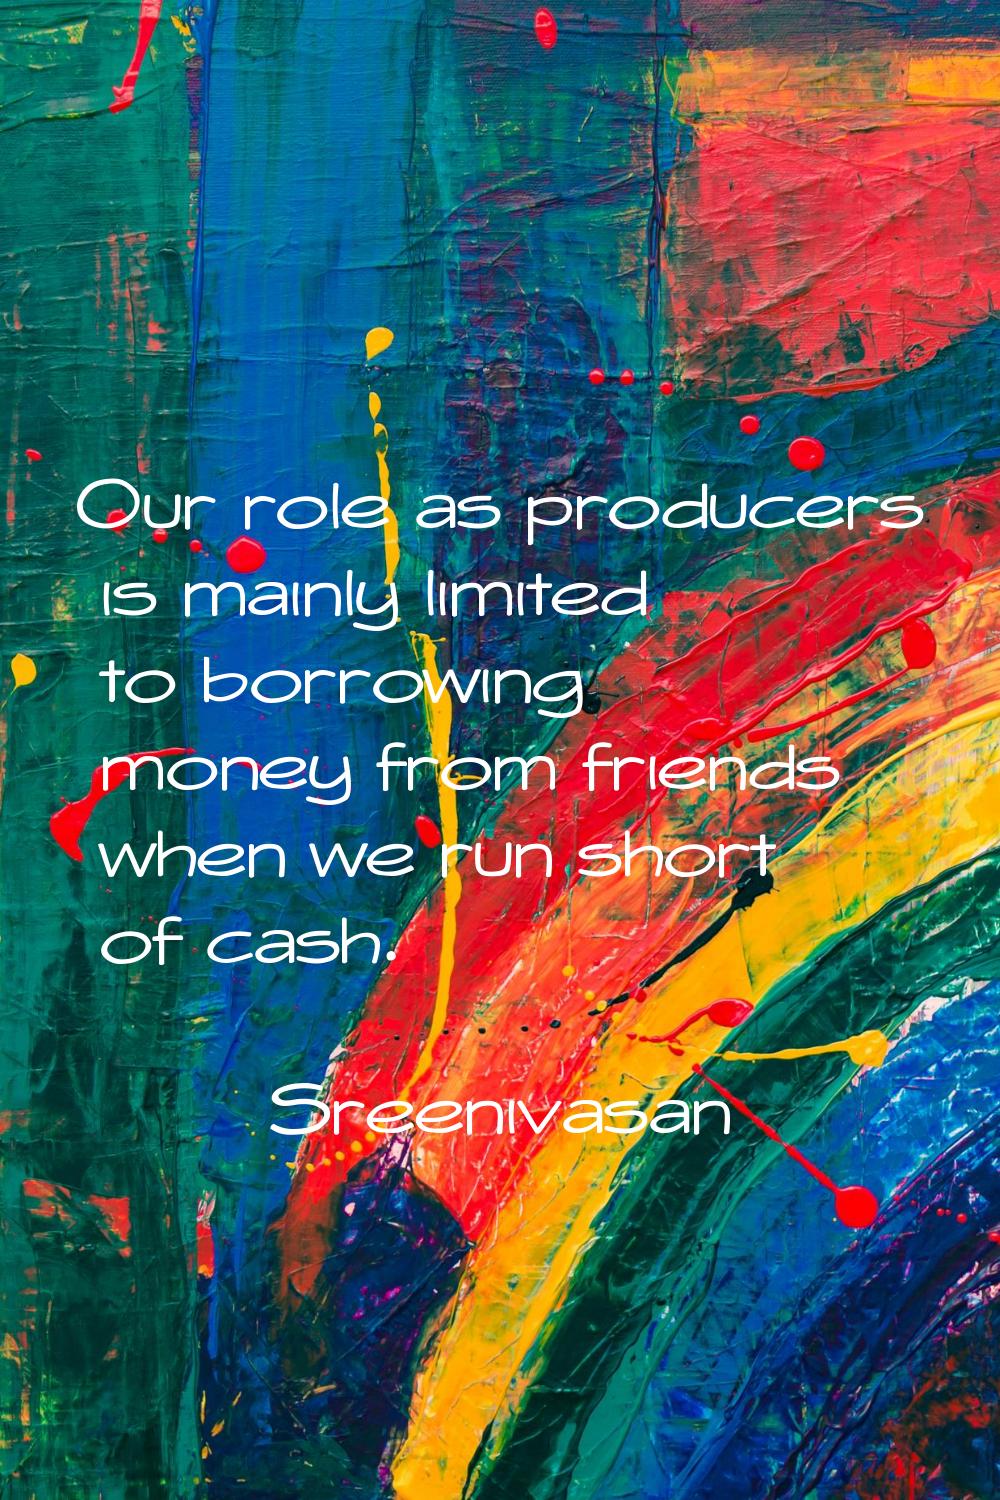 Our role as producers is mainly limited to borrowing money from friends when we run short of cash.